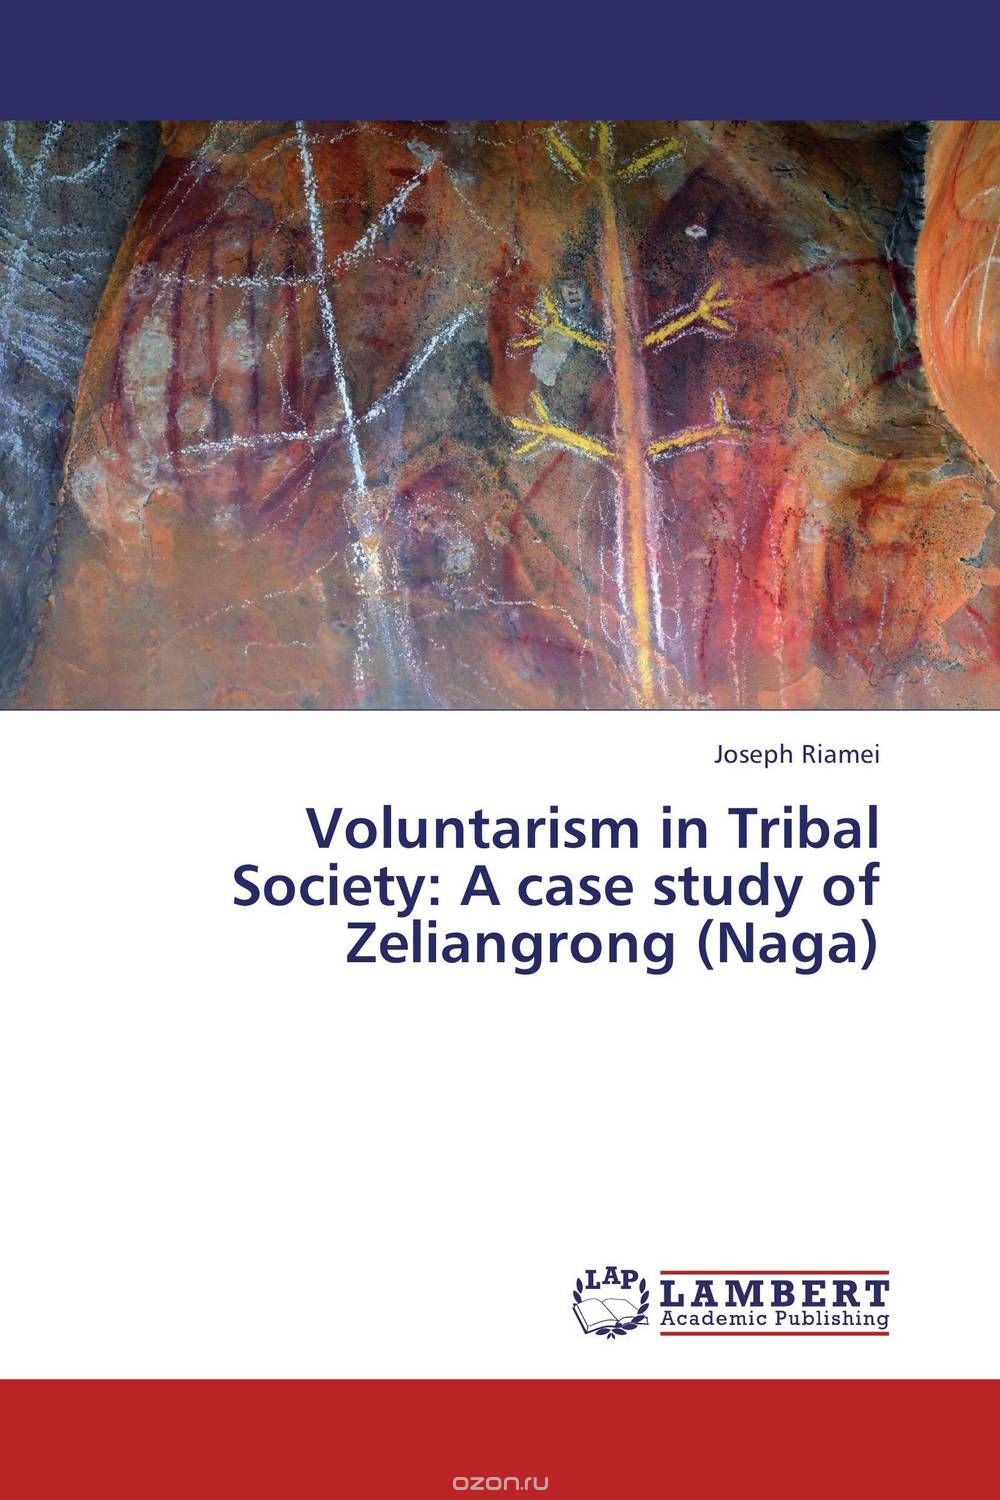 Voluntarism in Tribal Society: A case study of Zeliangrong (Naga)